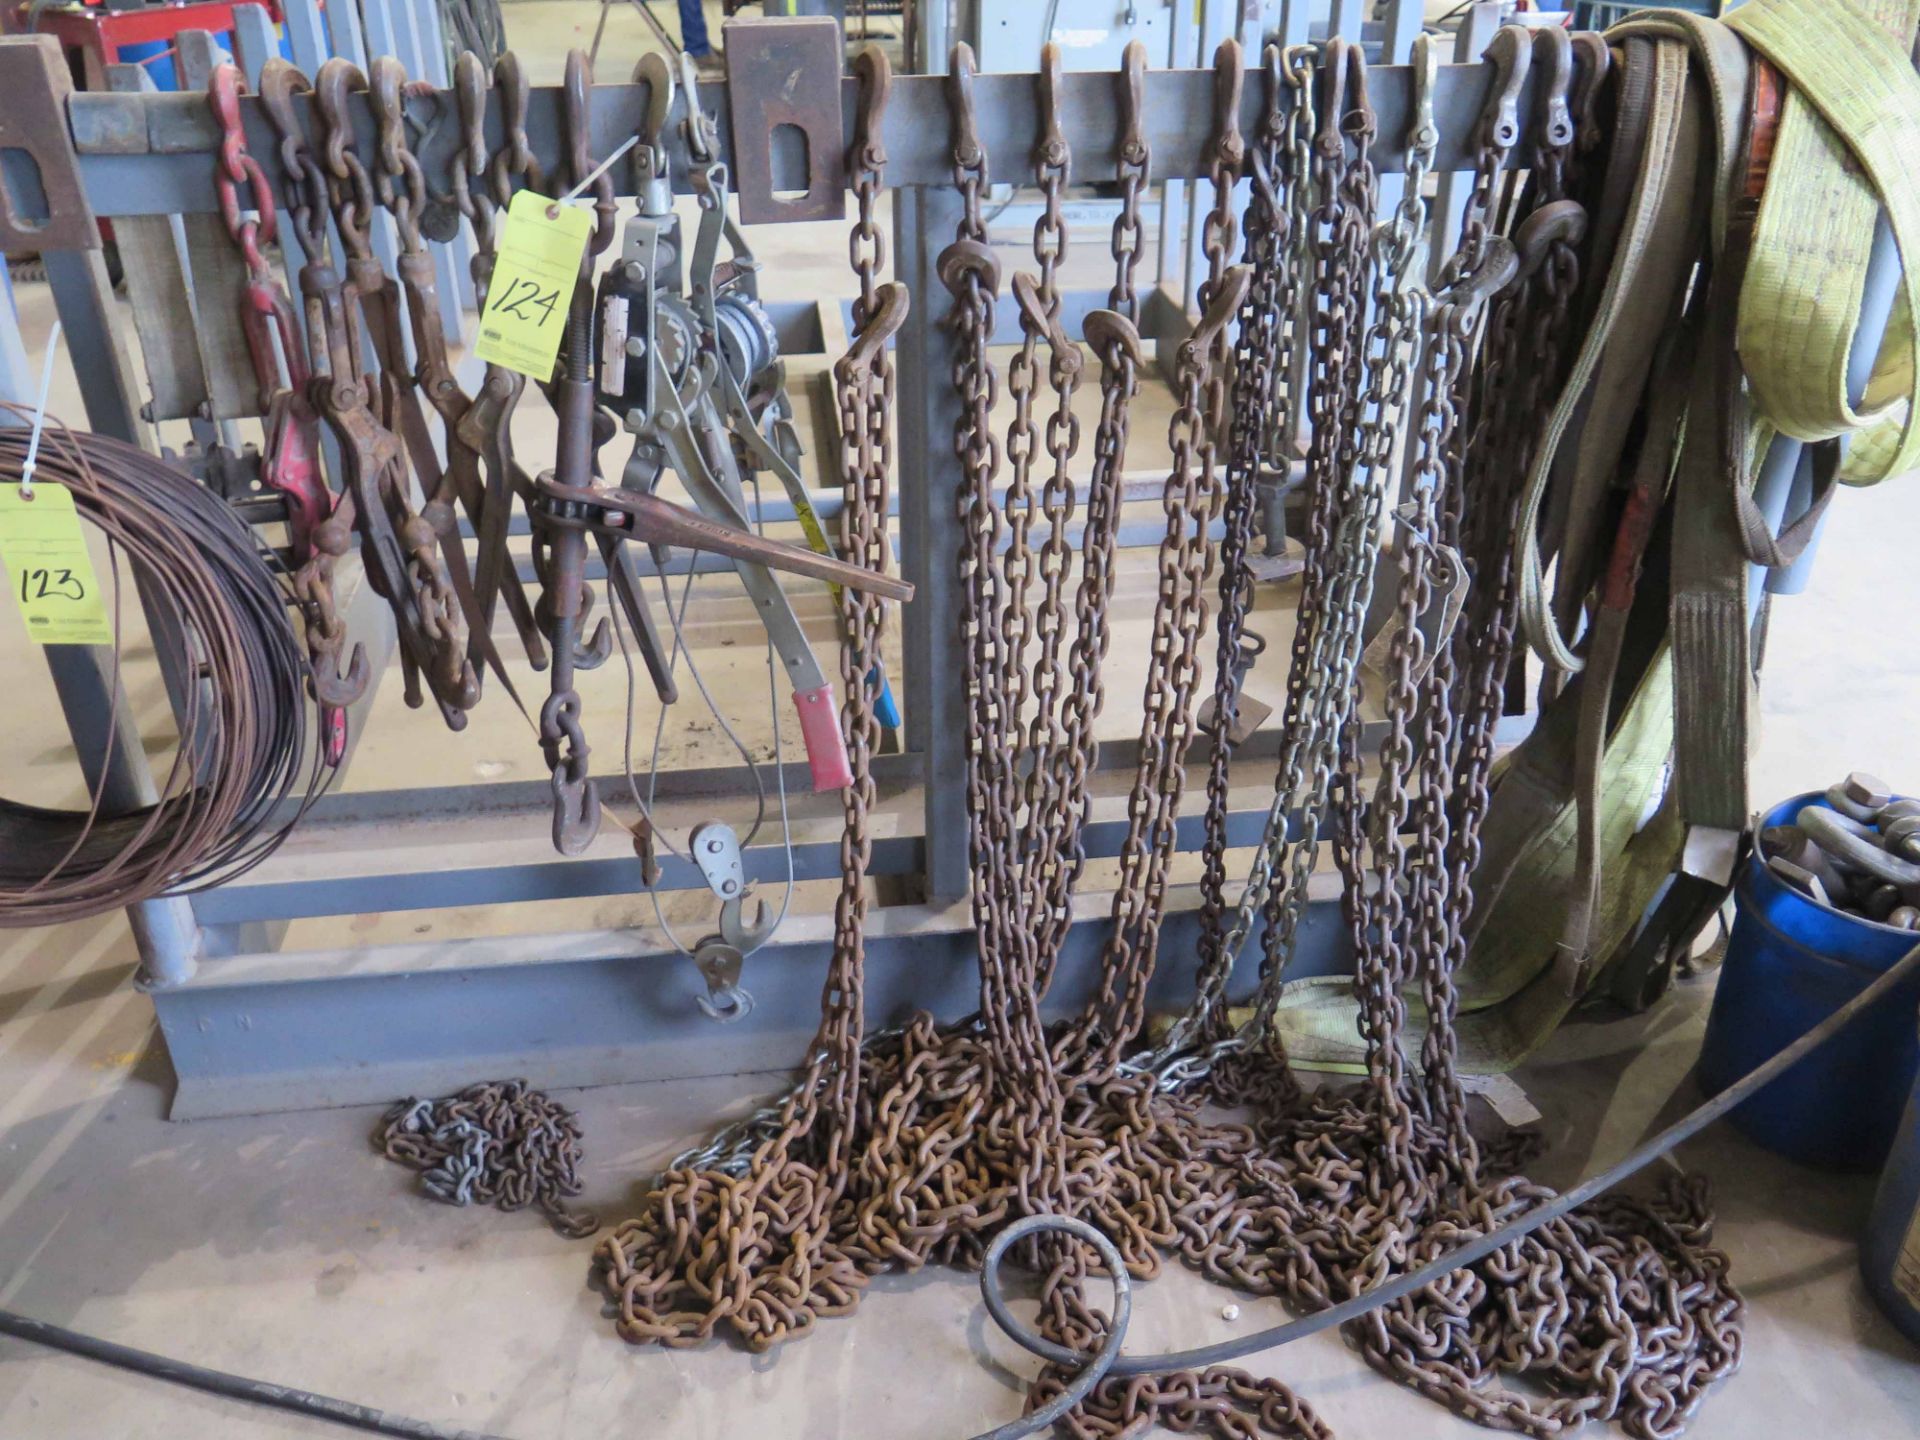 LOT CONSISTING OF: chain, binders, rigging chain, straps & come-alongs